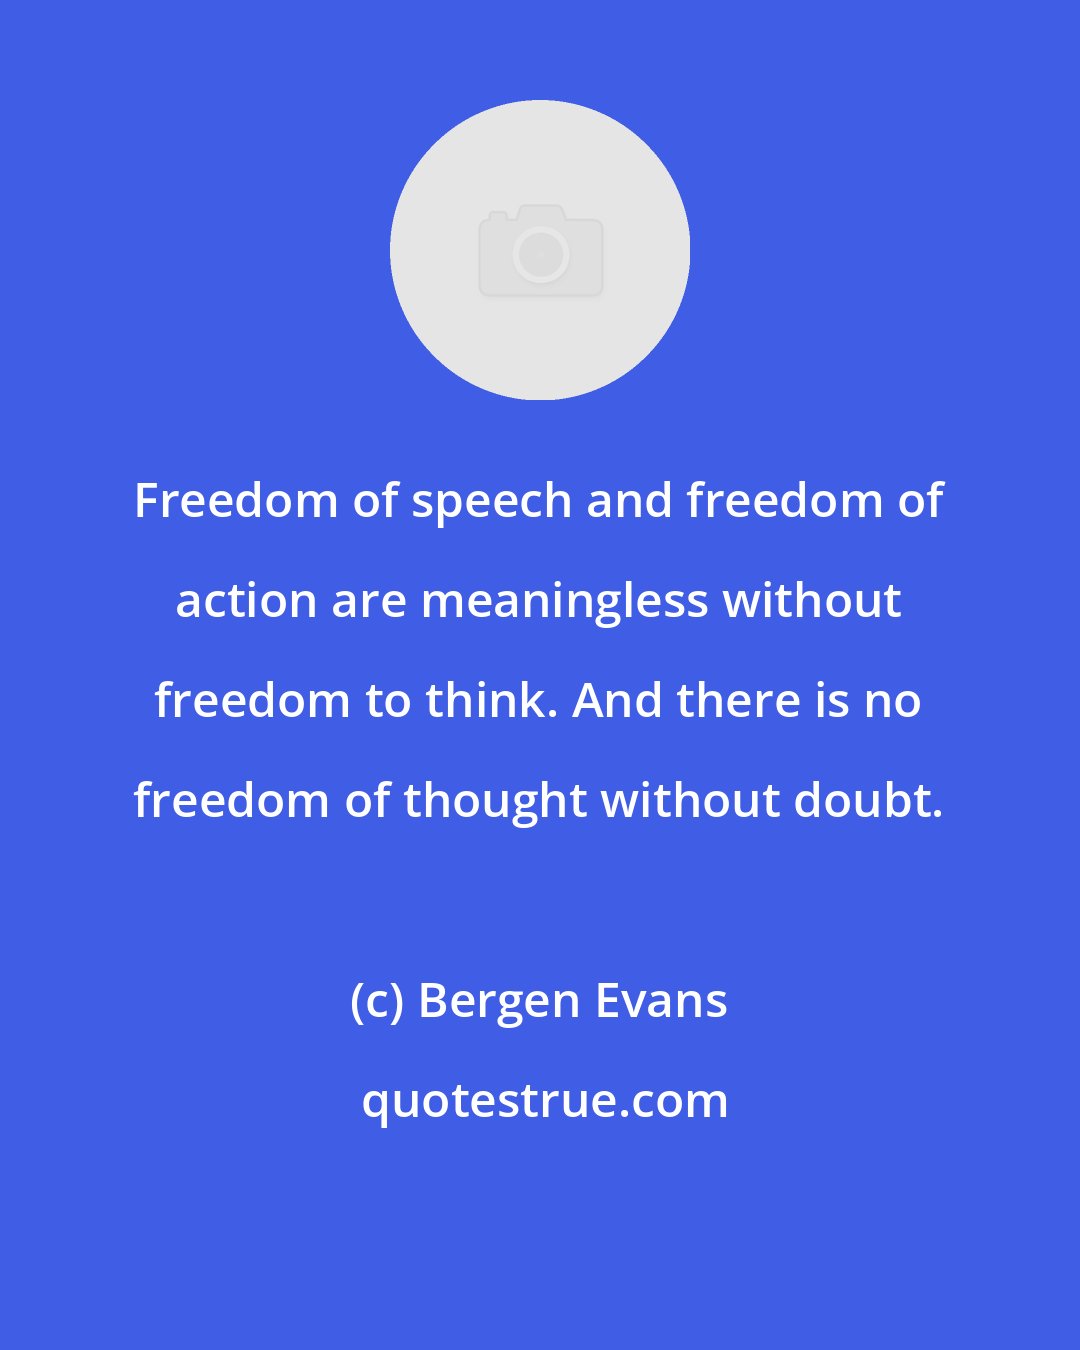 Bergen Evans: Freedom of speech and freedom of action are meaningless without freedom to think. And there is no freedom of thought without doubt.